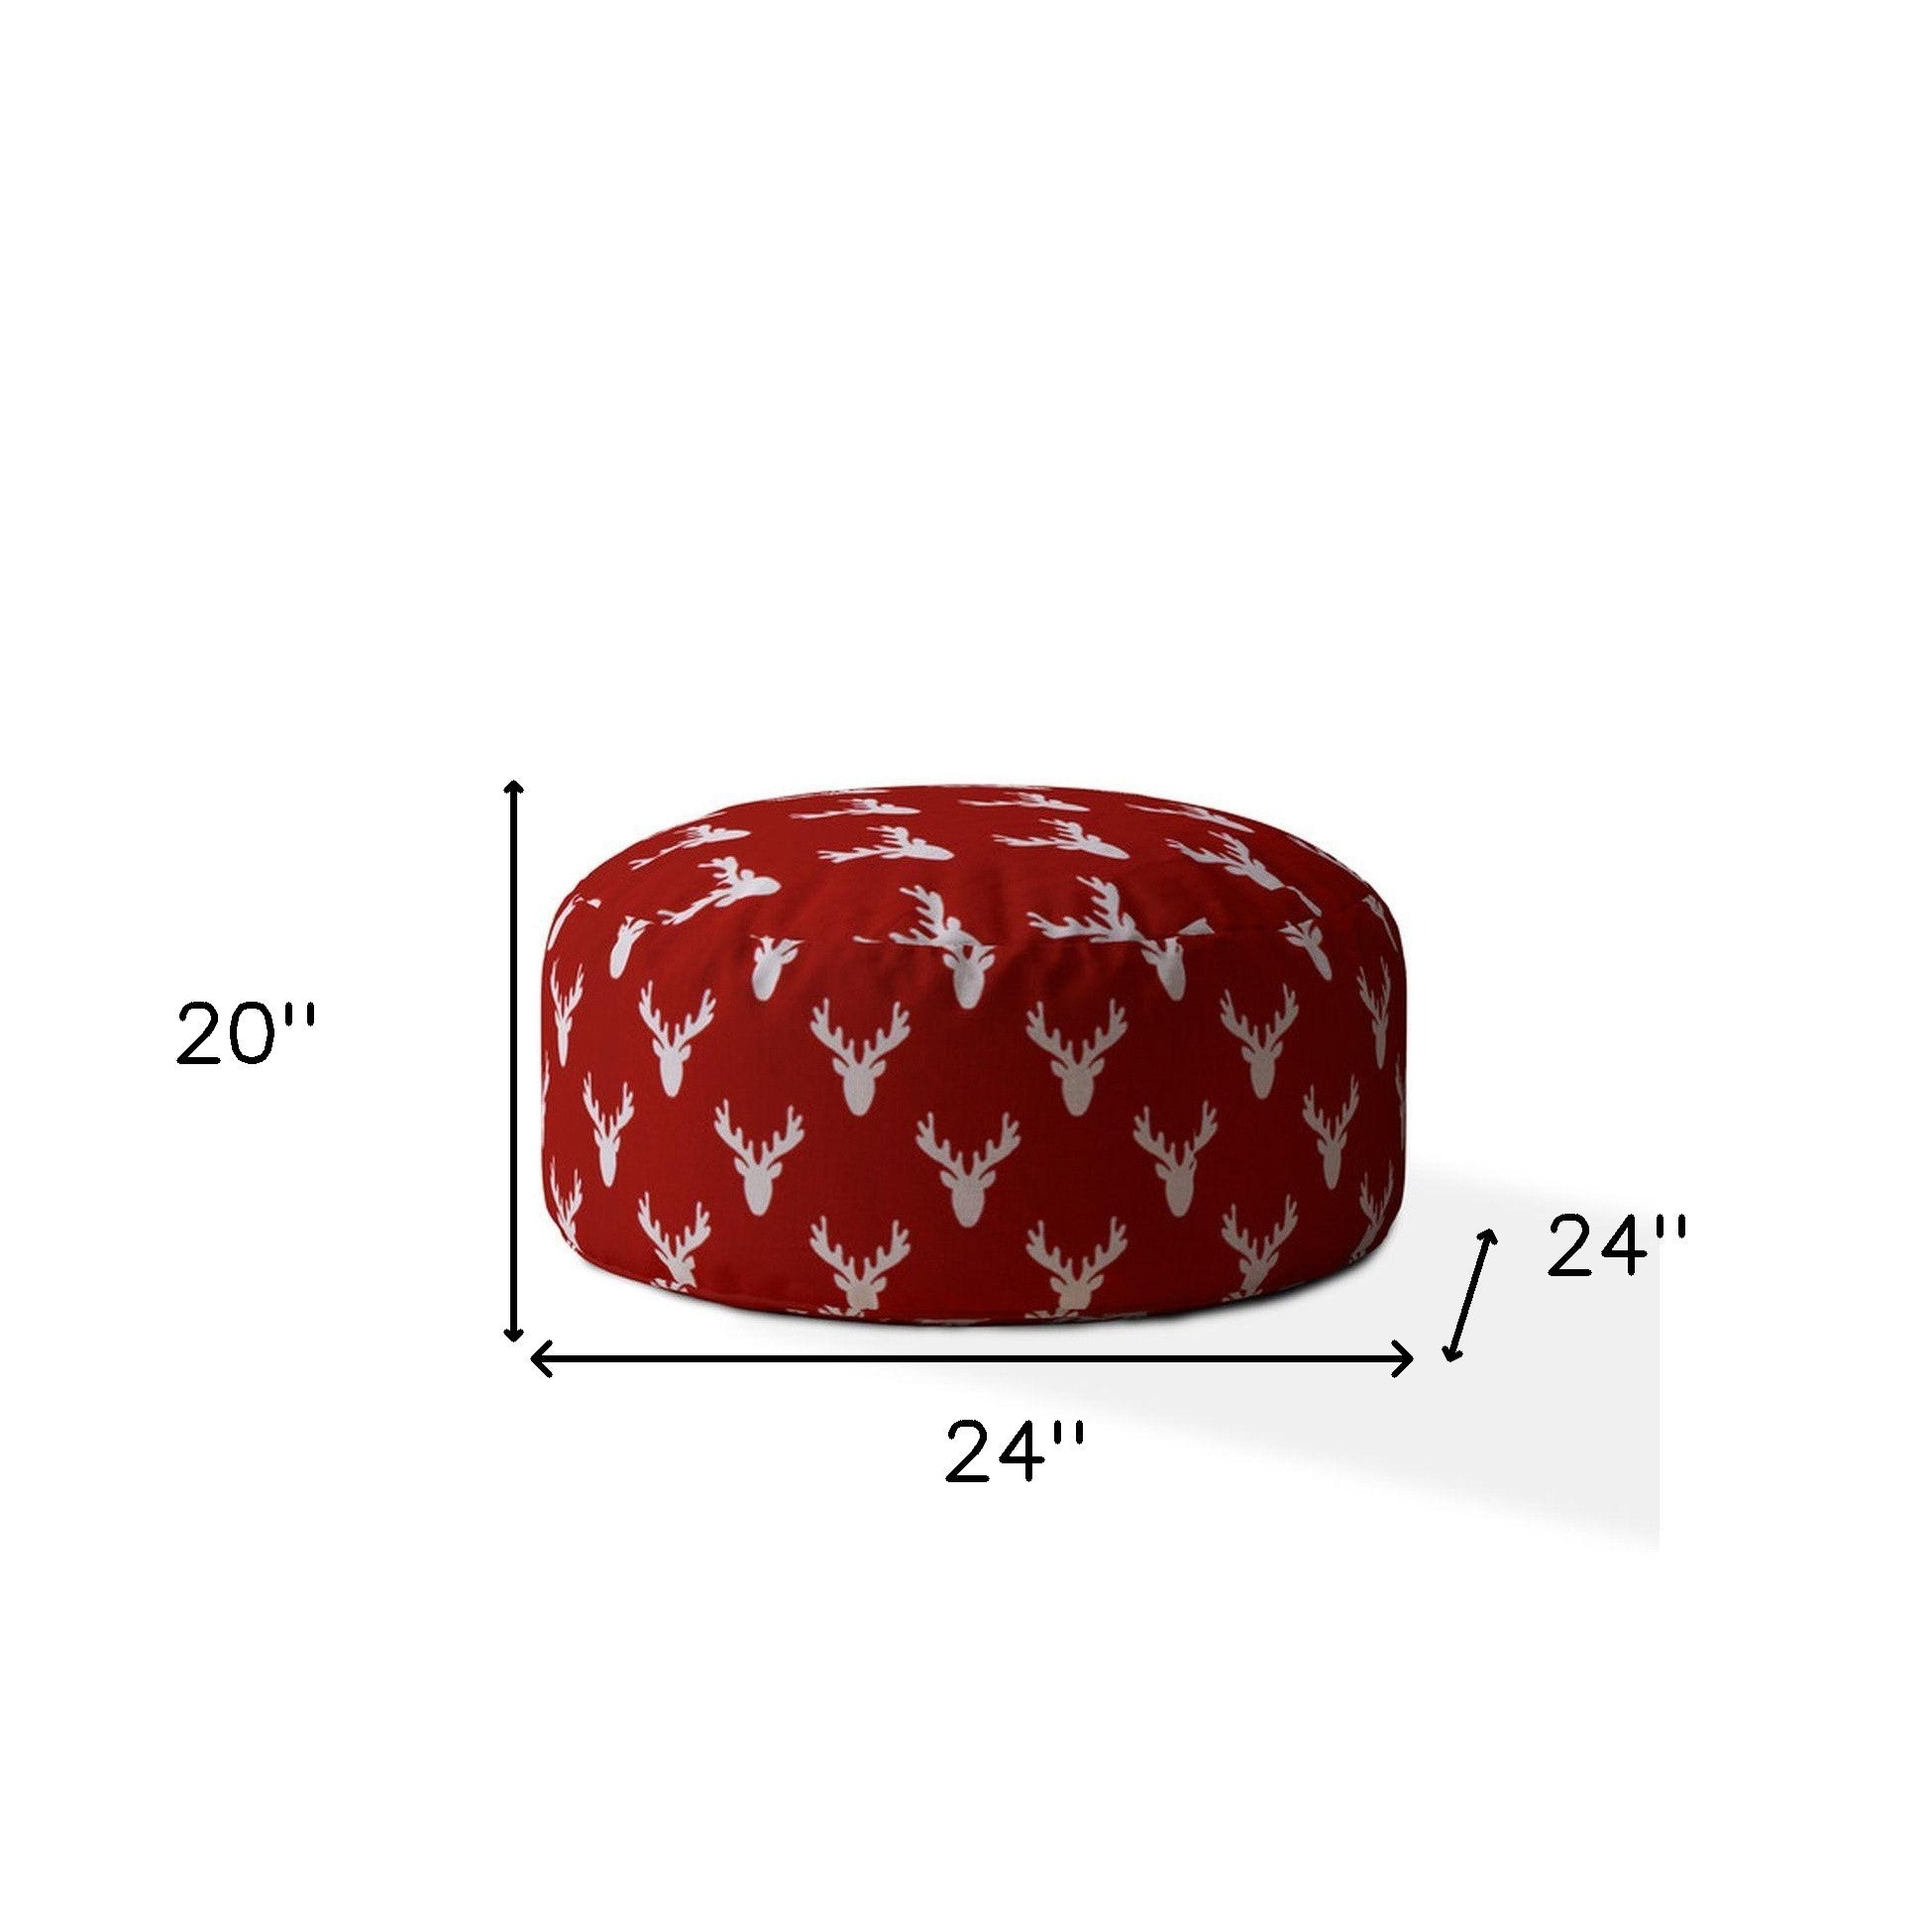 24" Red And White Cotton Round Stag Pouf Cover